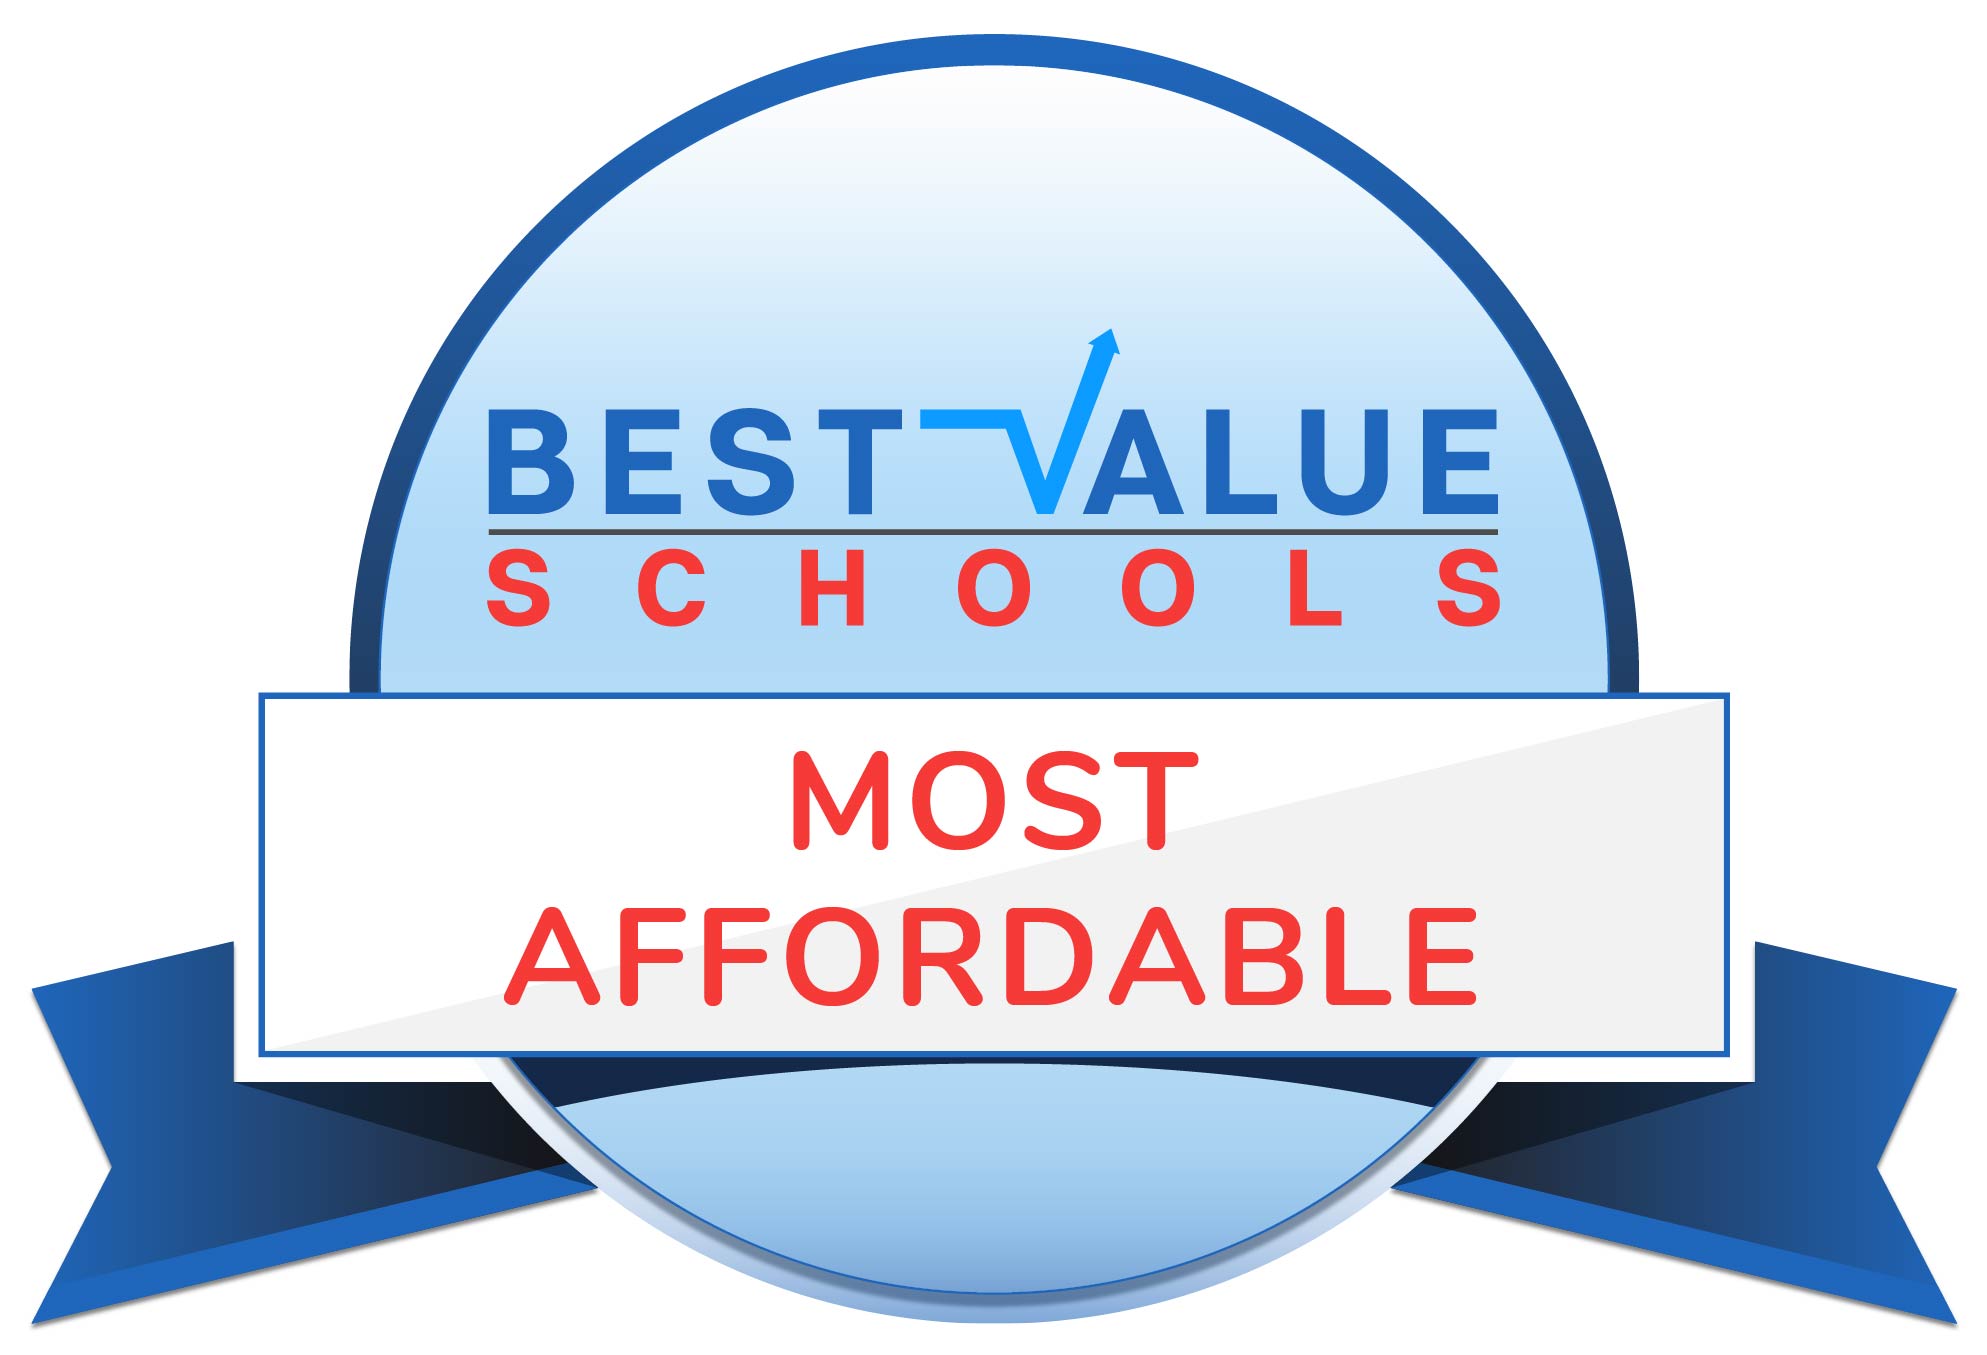 Best value schools, Hodges is one of the most affordable universitys